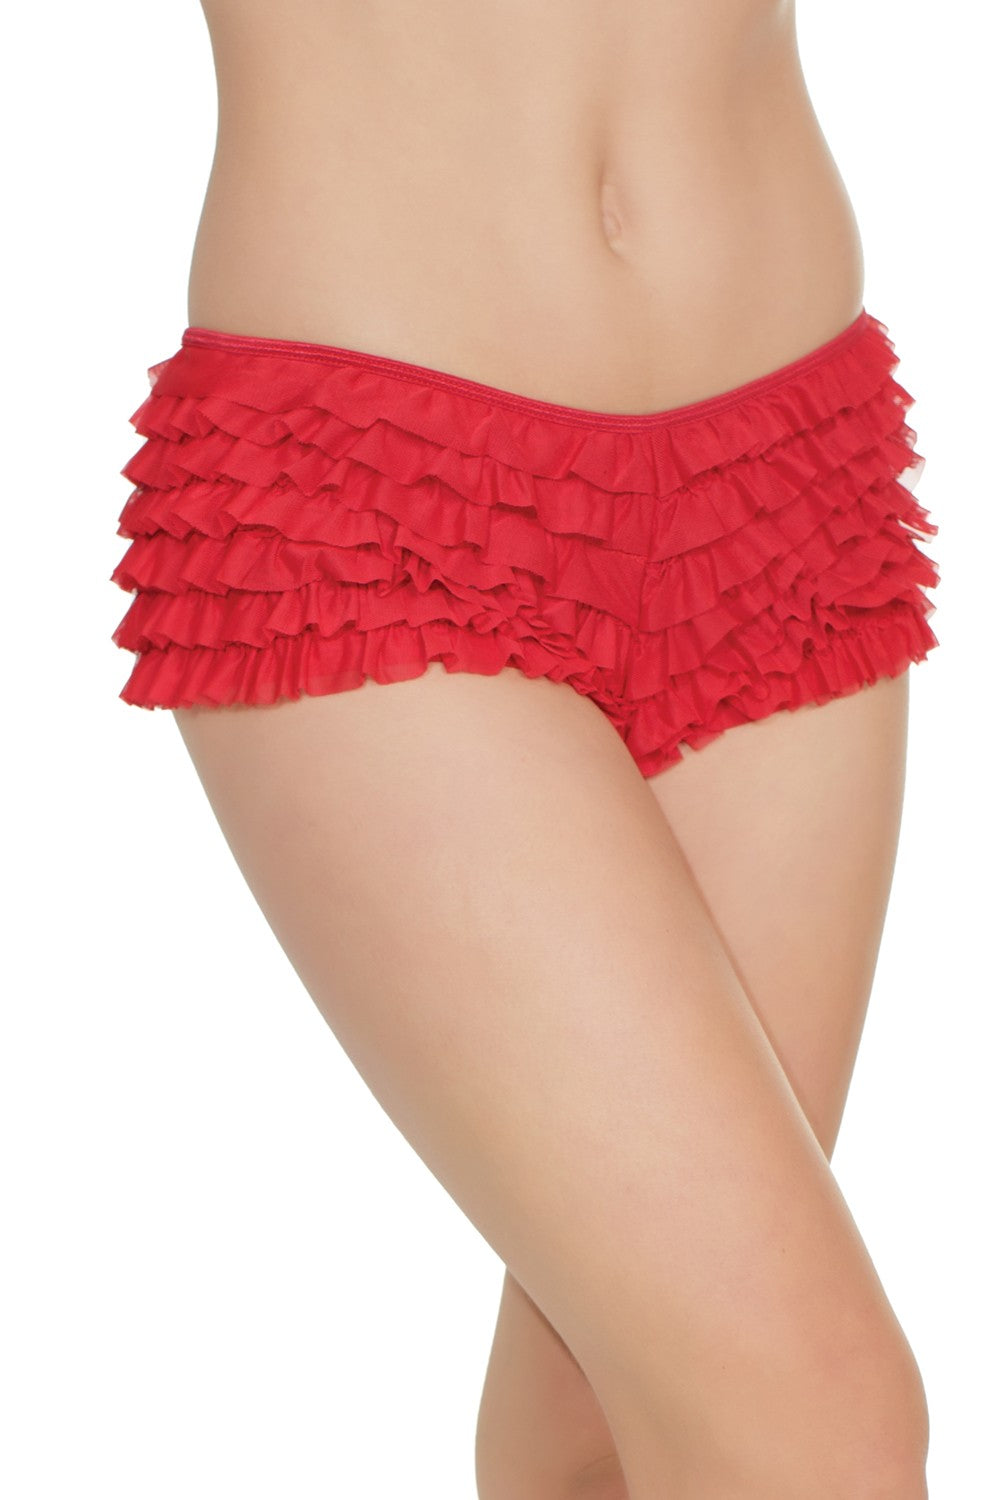 Ruffle Shorts Red - Model Express Vancouver